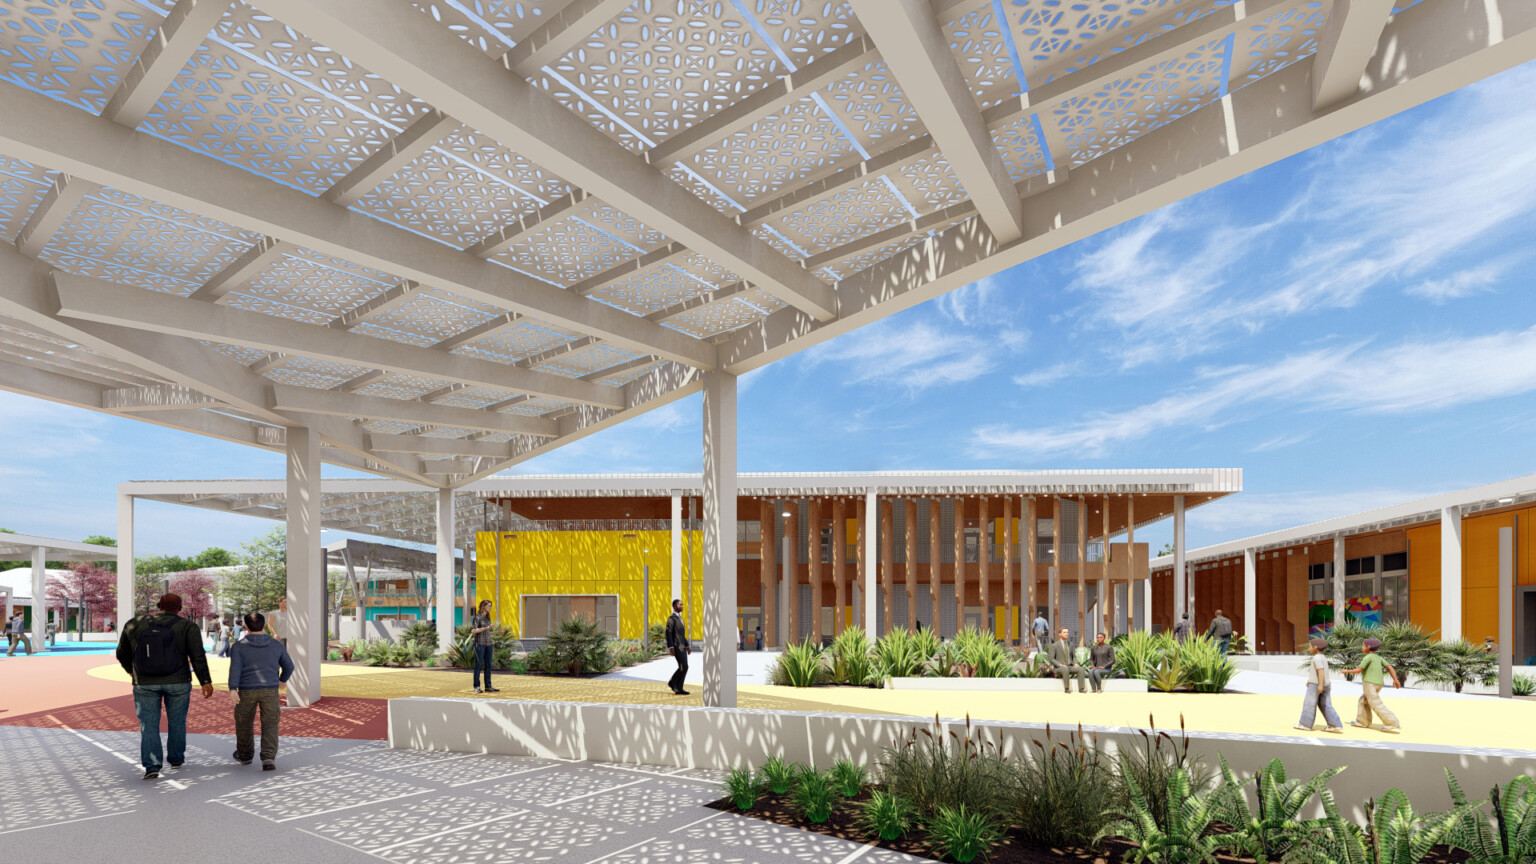 U.S. Virgin Islands Department of Education campus rendering. Courtyard with perforated sun canopies, yellow building opposite